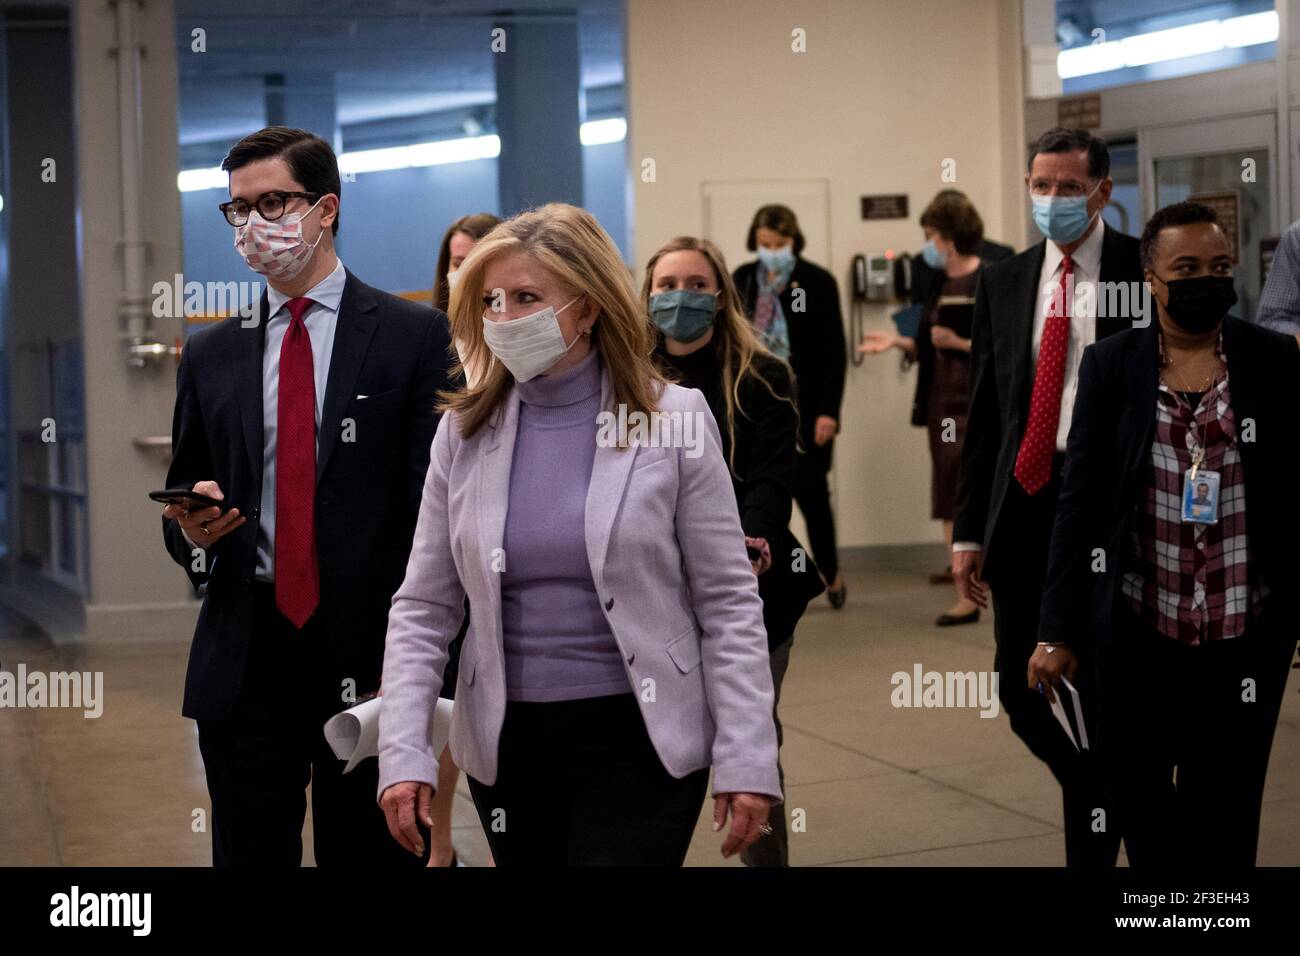 United States Senator Marsha Blackburn (Republican of Tennessee), left, and United States Senator John Barrasso (Republican of Wyoming), right, make their way through the Senate subway for a vote at the U.S. Capitol in Washington, DC, Tuesday, March 16, 2021. Credit: Rod Lamkey/CNP /MediaPunch Stock Photo